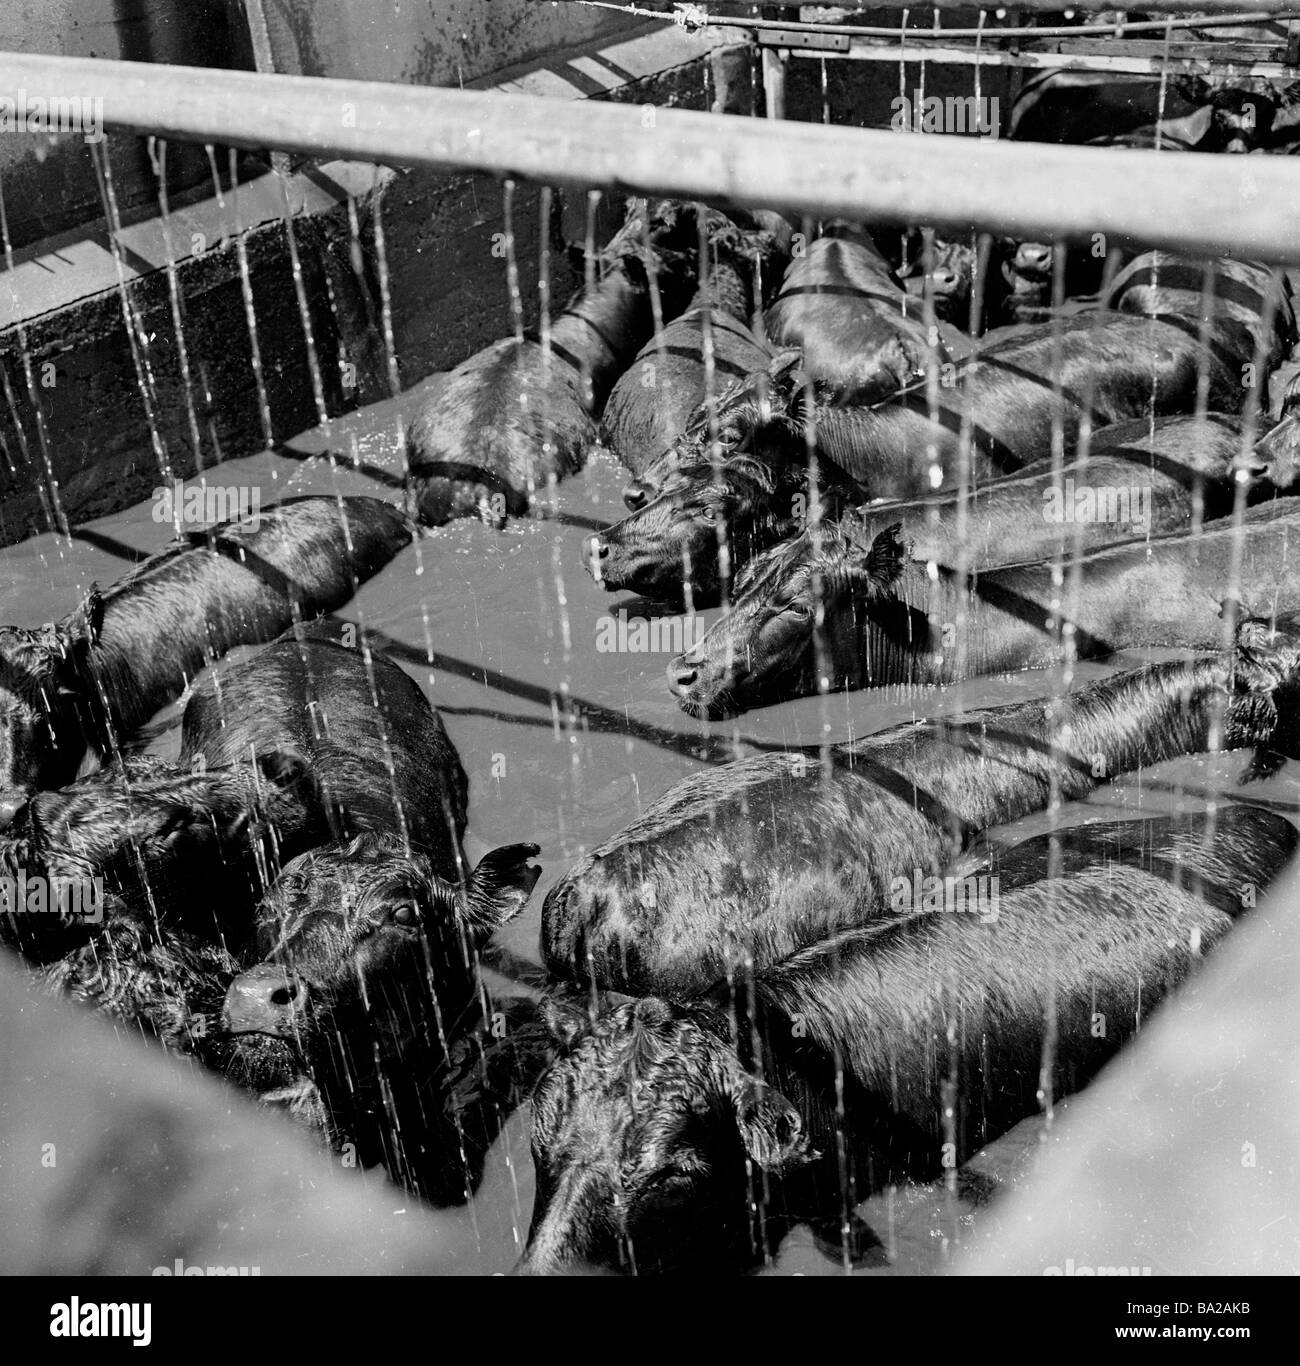 1950s, historical,cattle being washed in a holding pen, Argentina. A major industry for the country, it is the world's third largest exporter of beef. Stock Photo